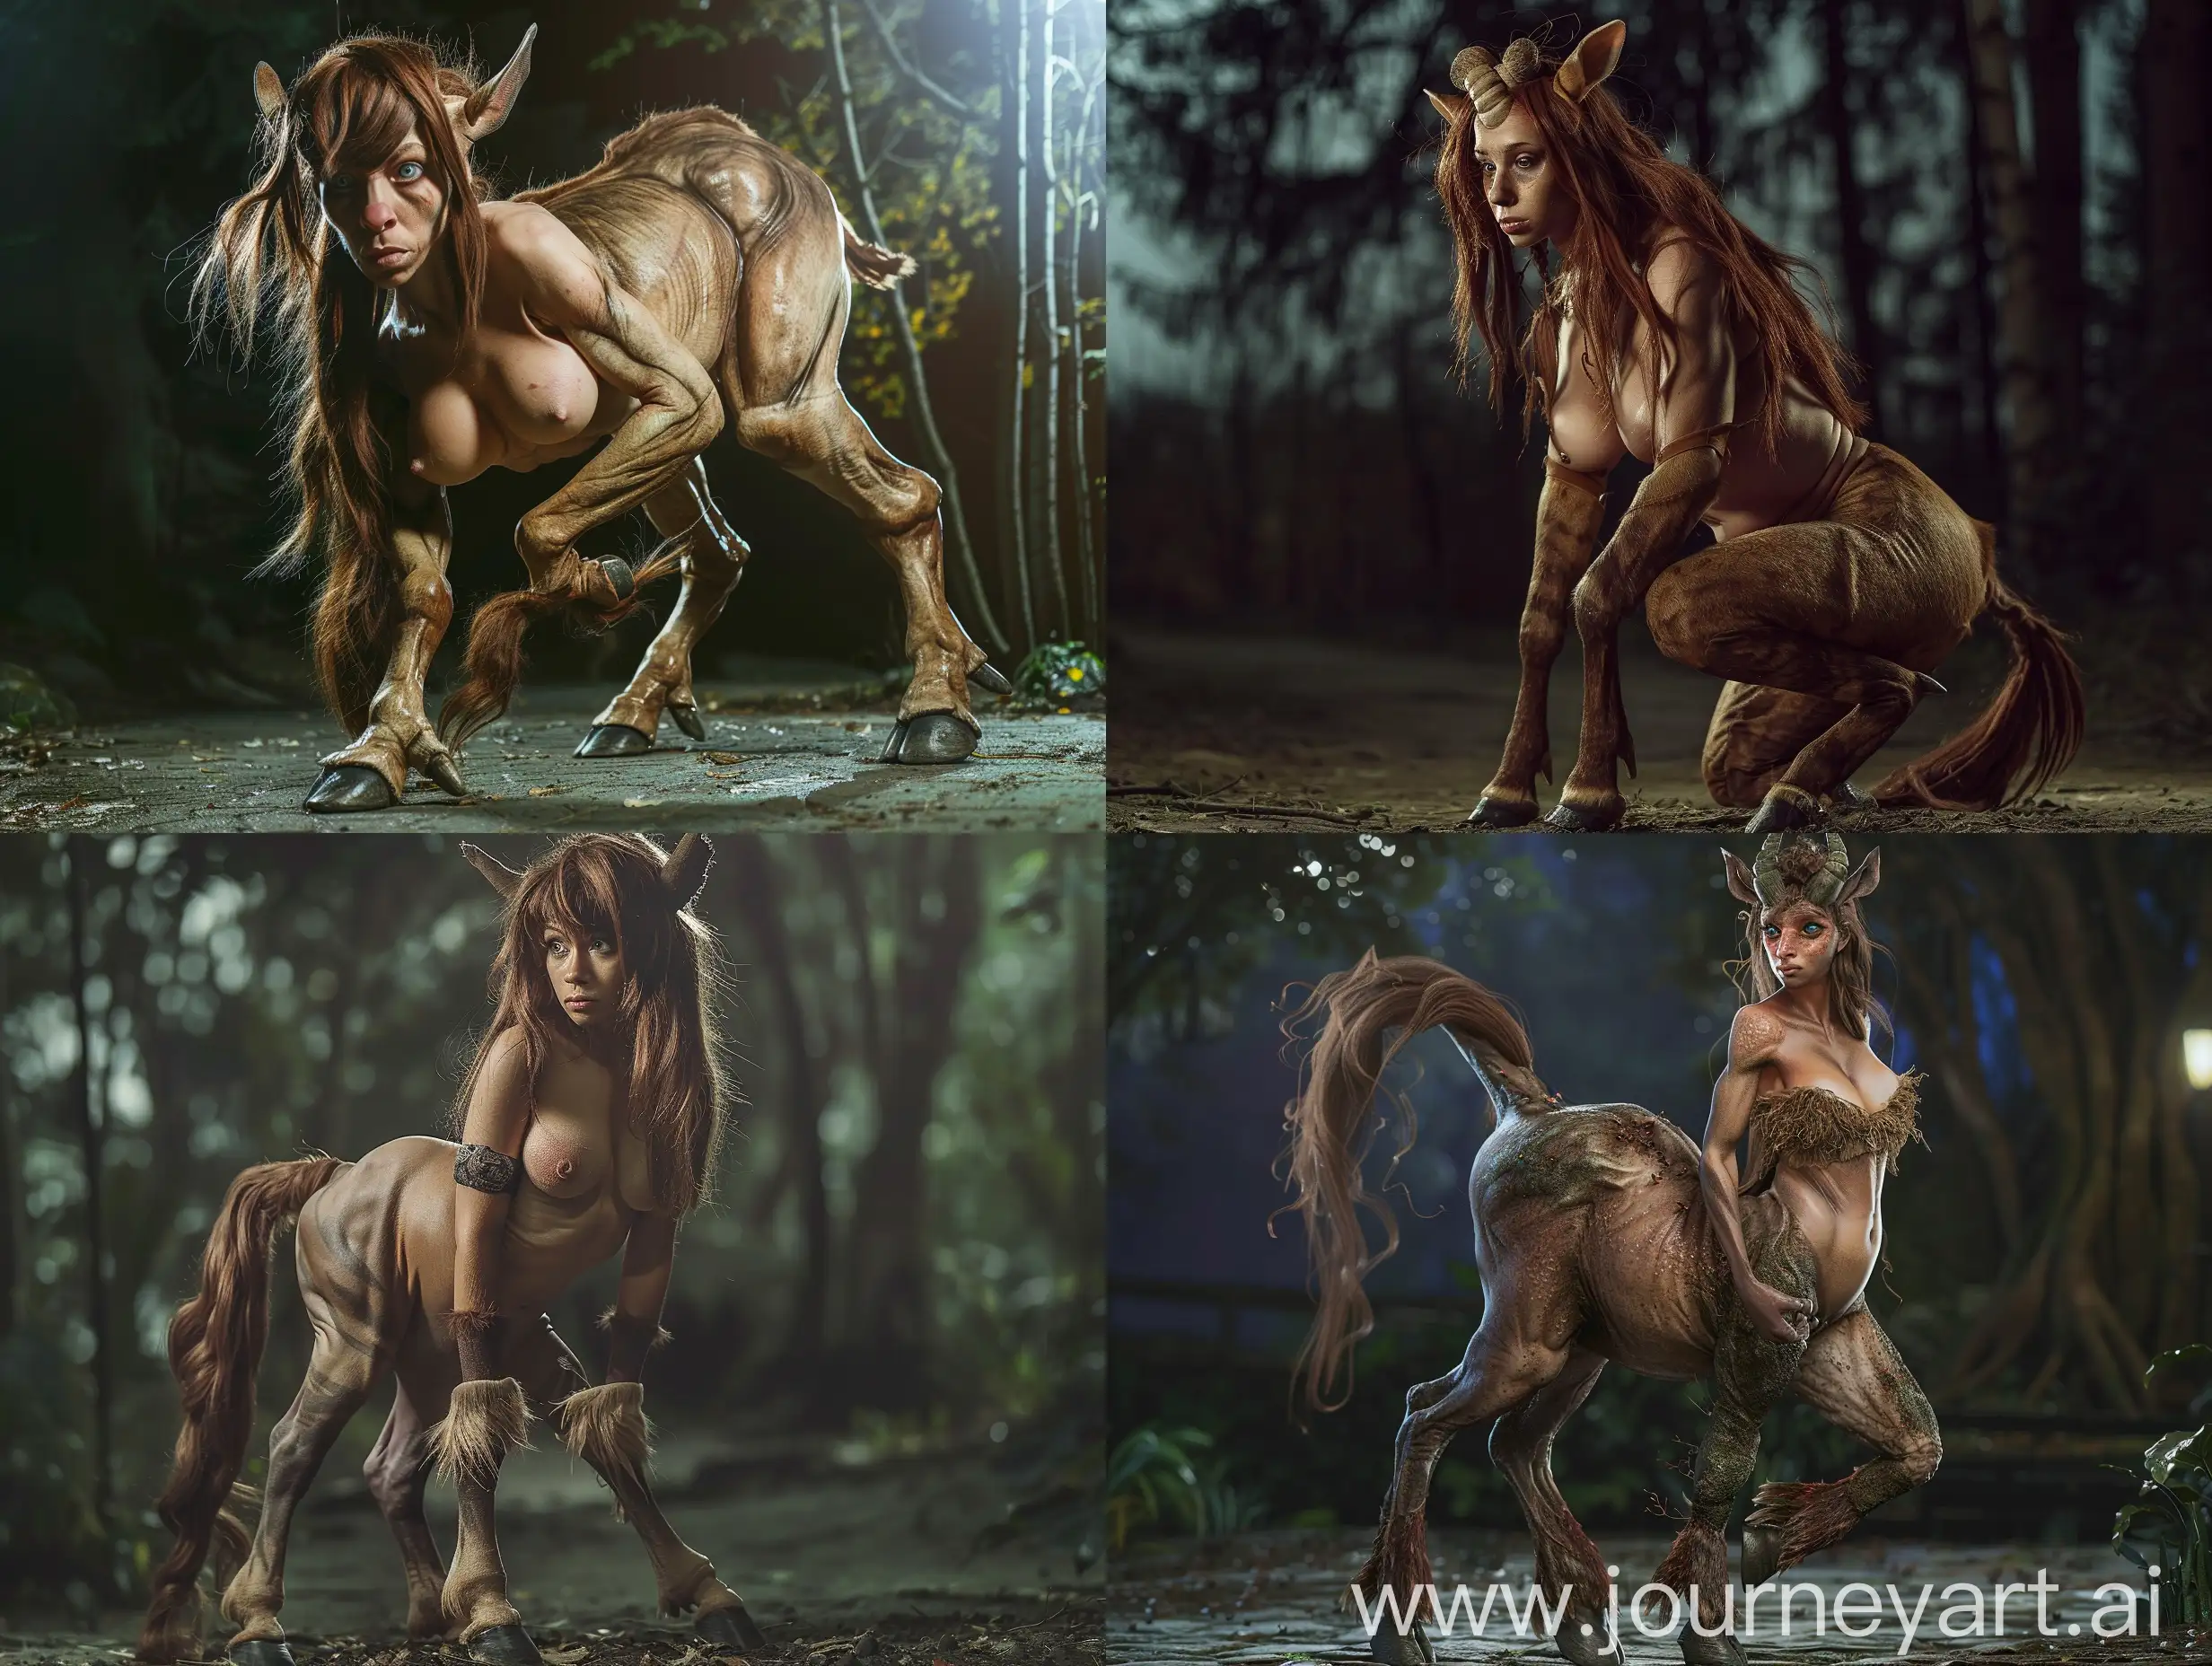 A female centaur. She has hooves, breast and a tail. She has loose brown hair. She is standing on all fours in a forest at night. Realistic photograph, full body picture